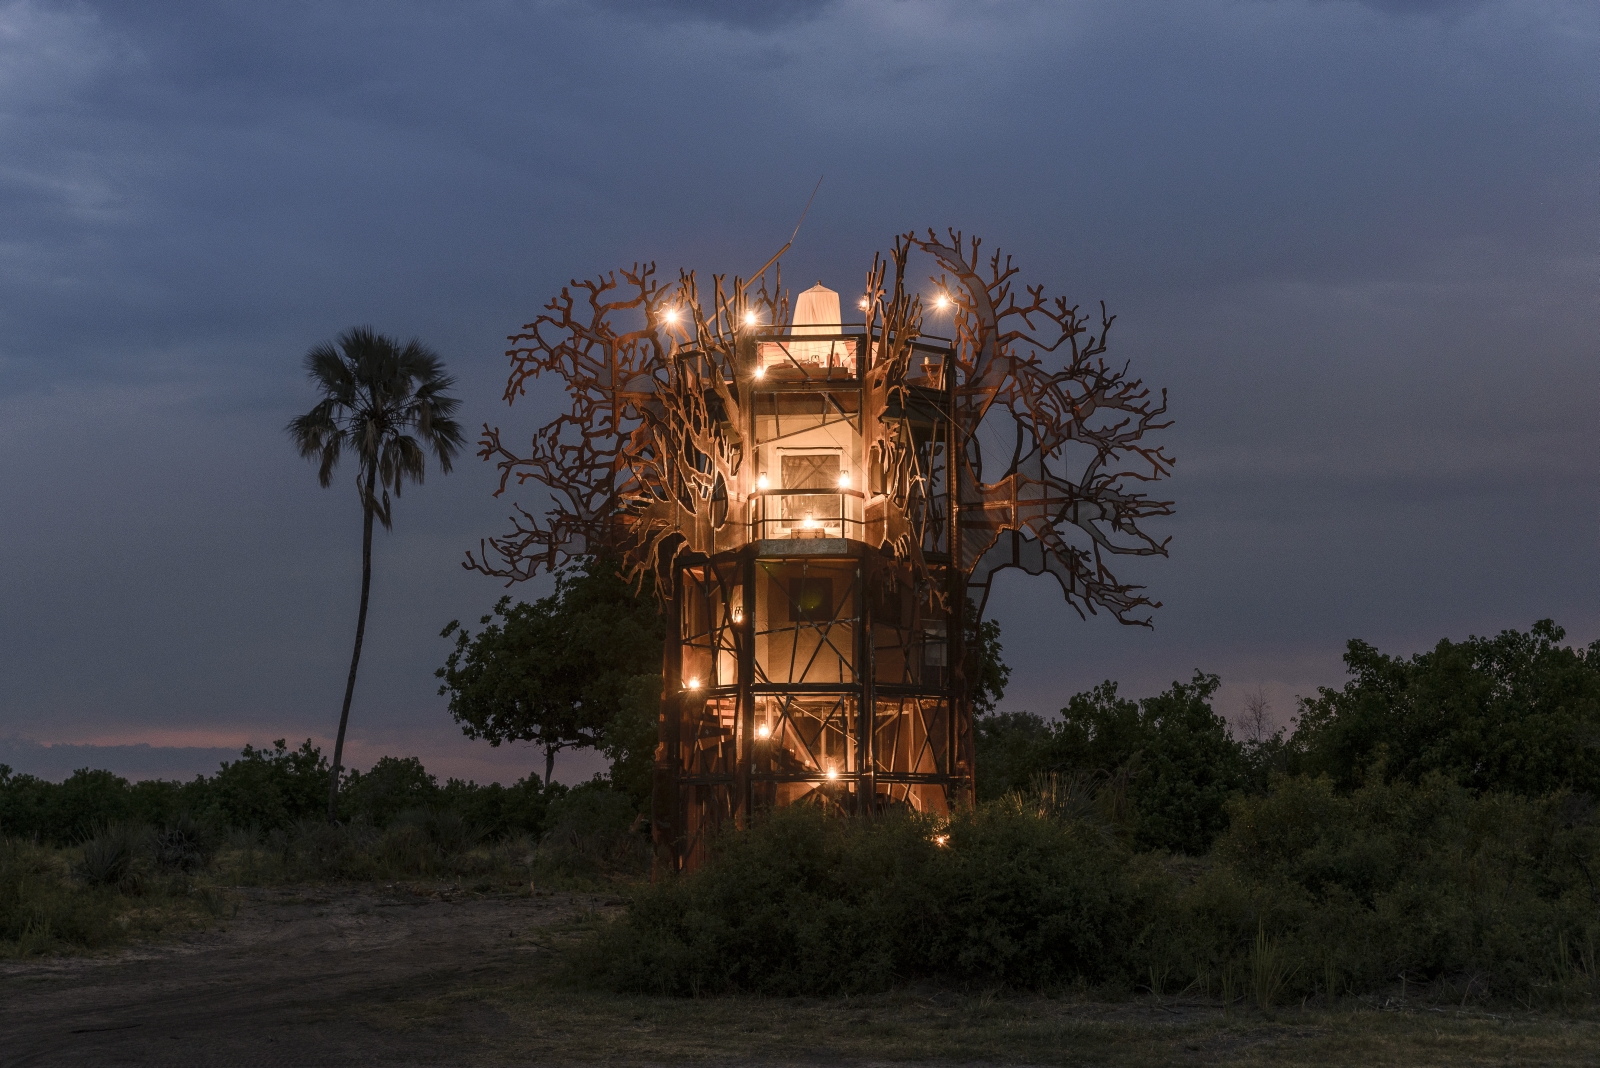 The Baobab suite of Xigera Safari Camp, with includes an outdoor star bed for an incredible overnight experience at luxury safari camp Xigera in the Okavango Delta, Botswana